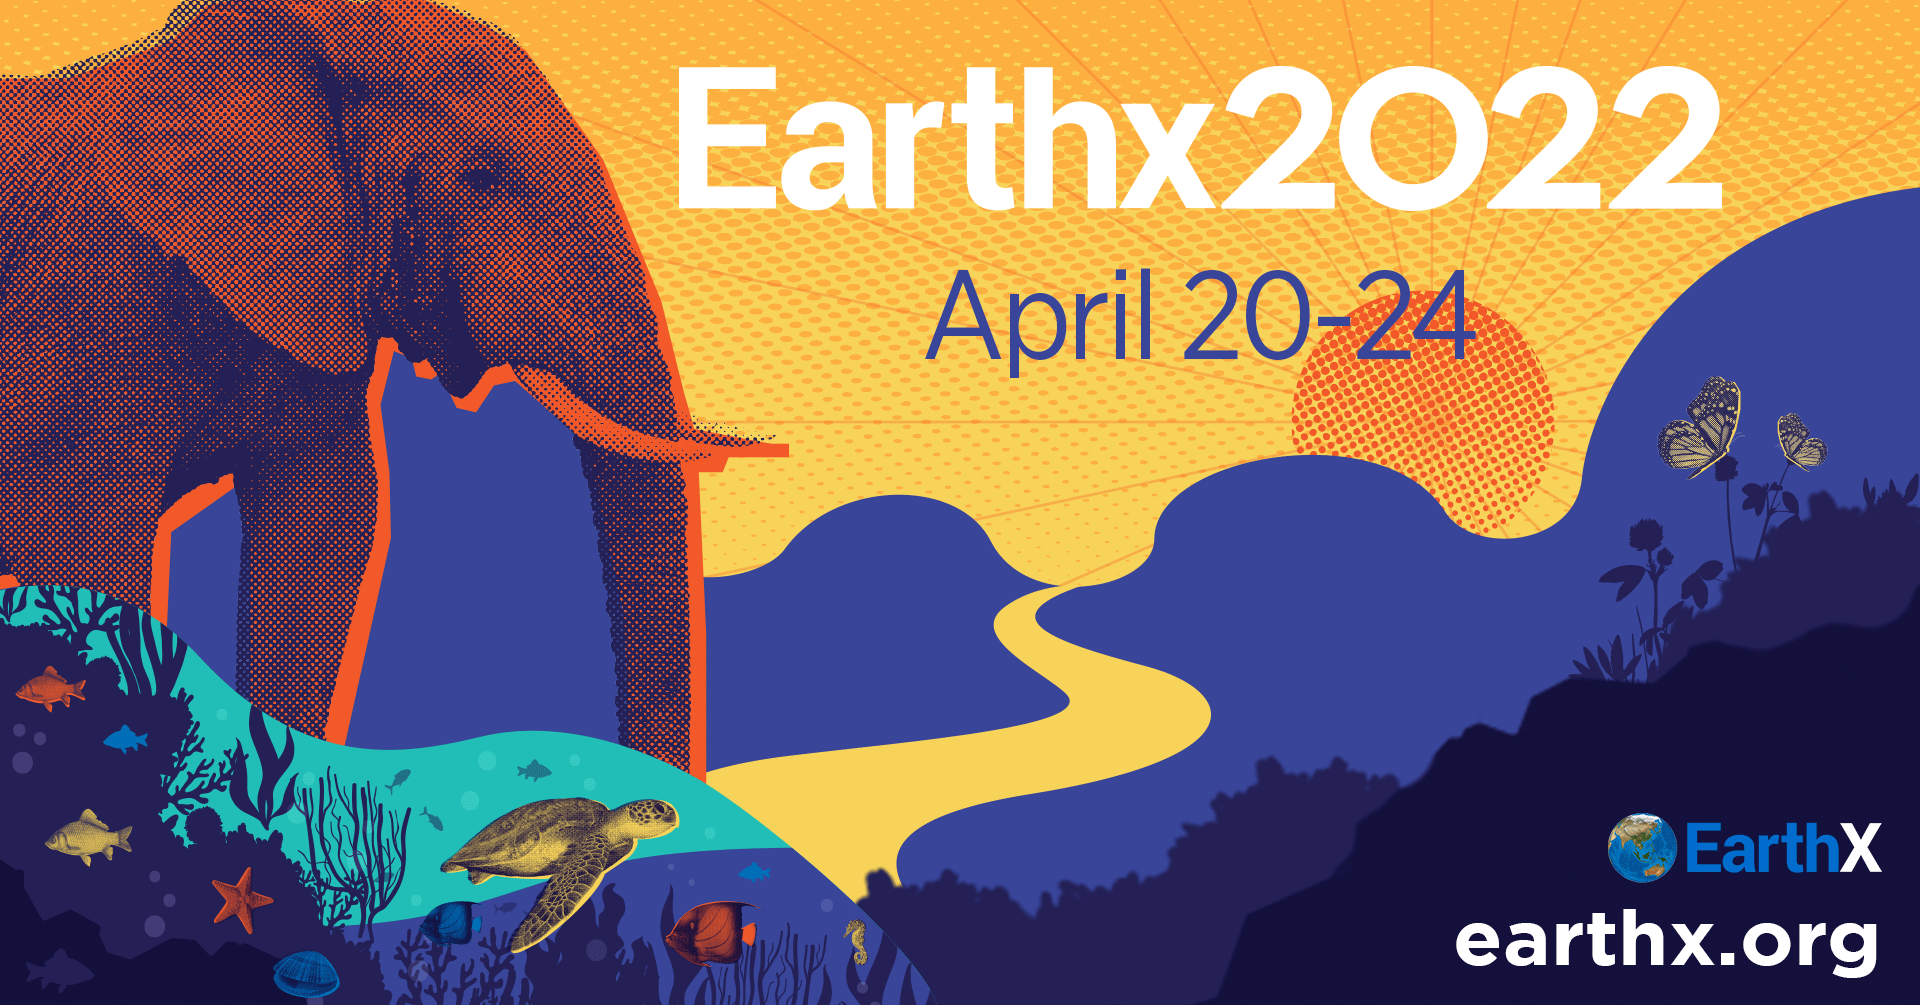 Earthx2022 at Kay Bailey Hutchison Convention Center